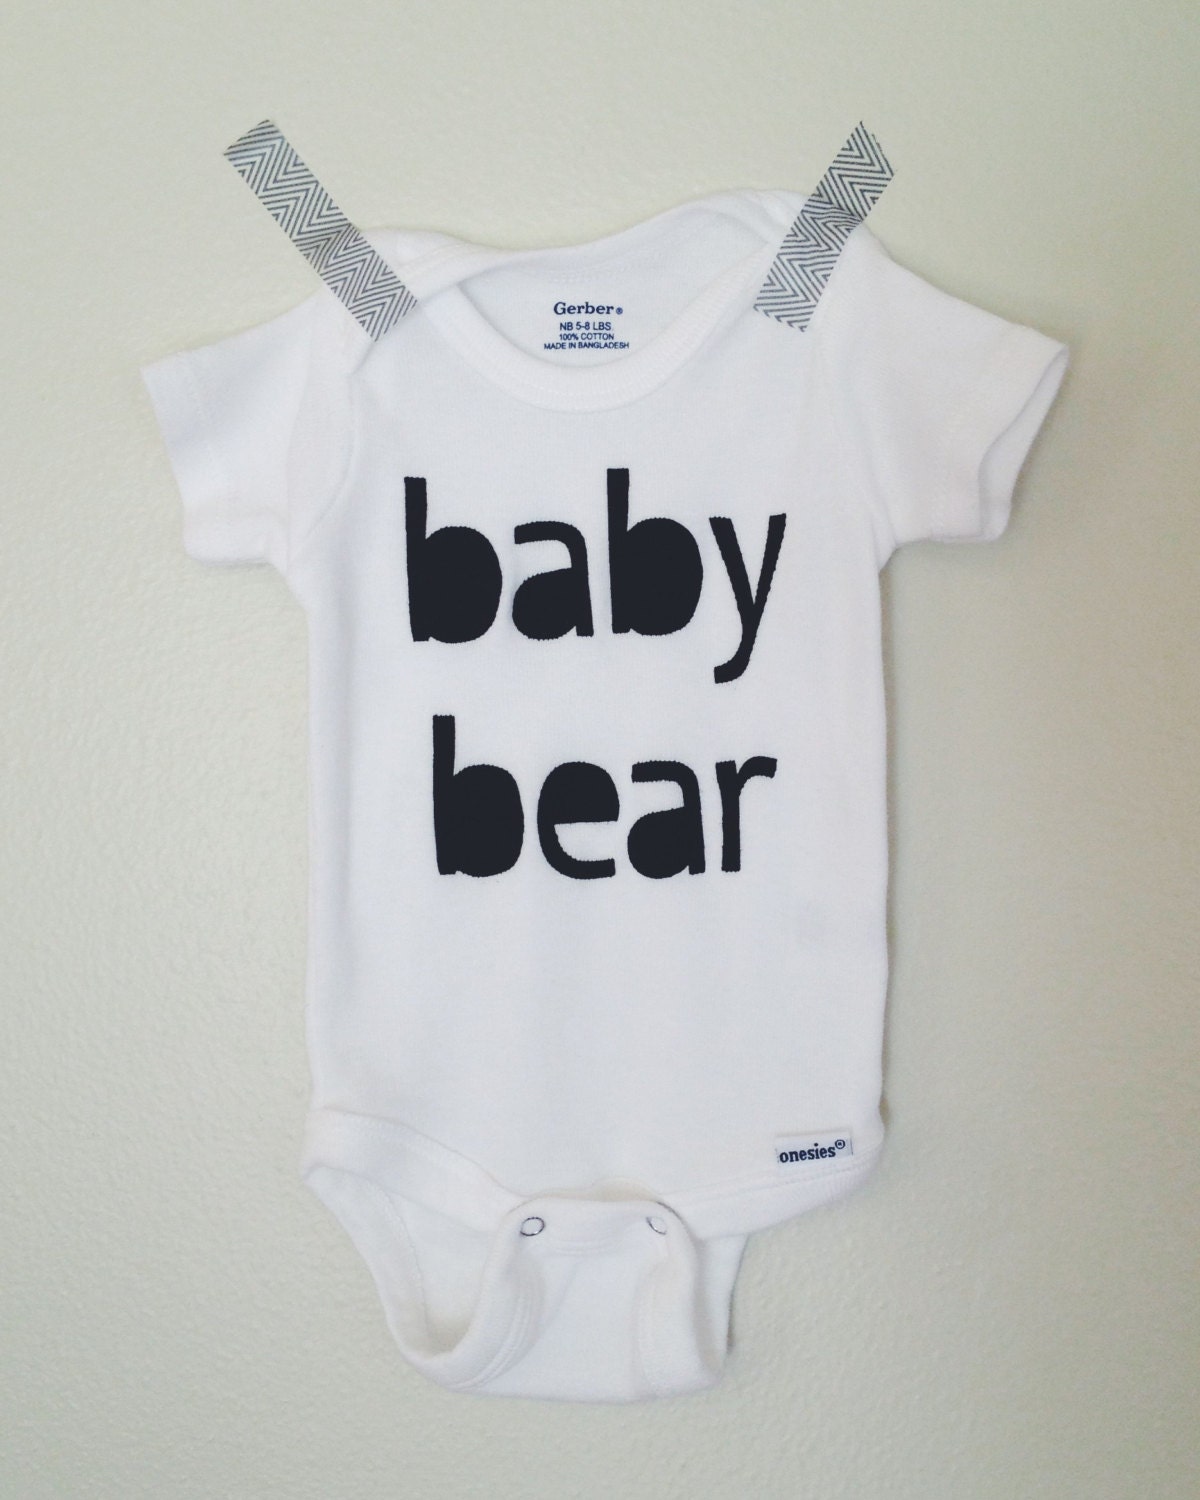 Baby Bear onesie by Lula Ball a great way to announce a | Etsy